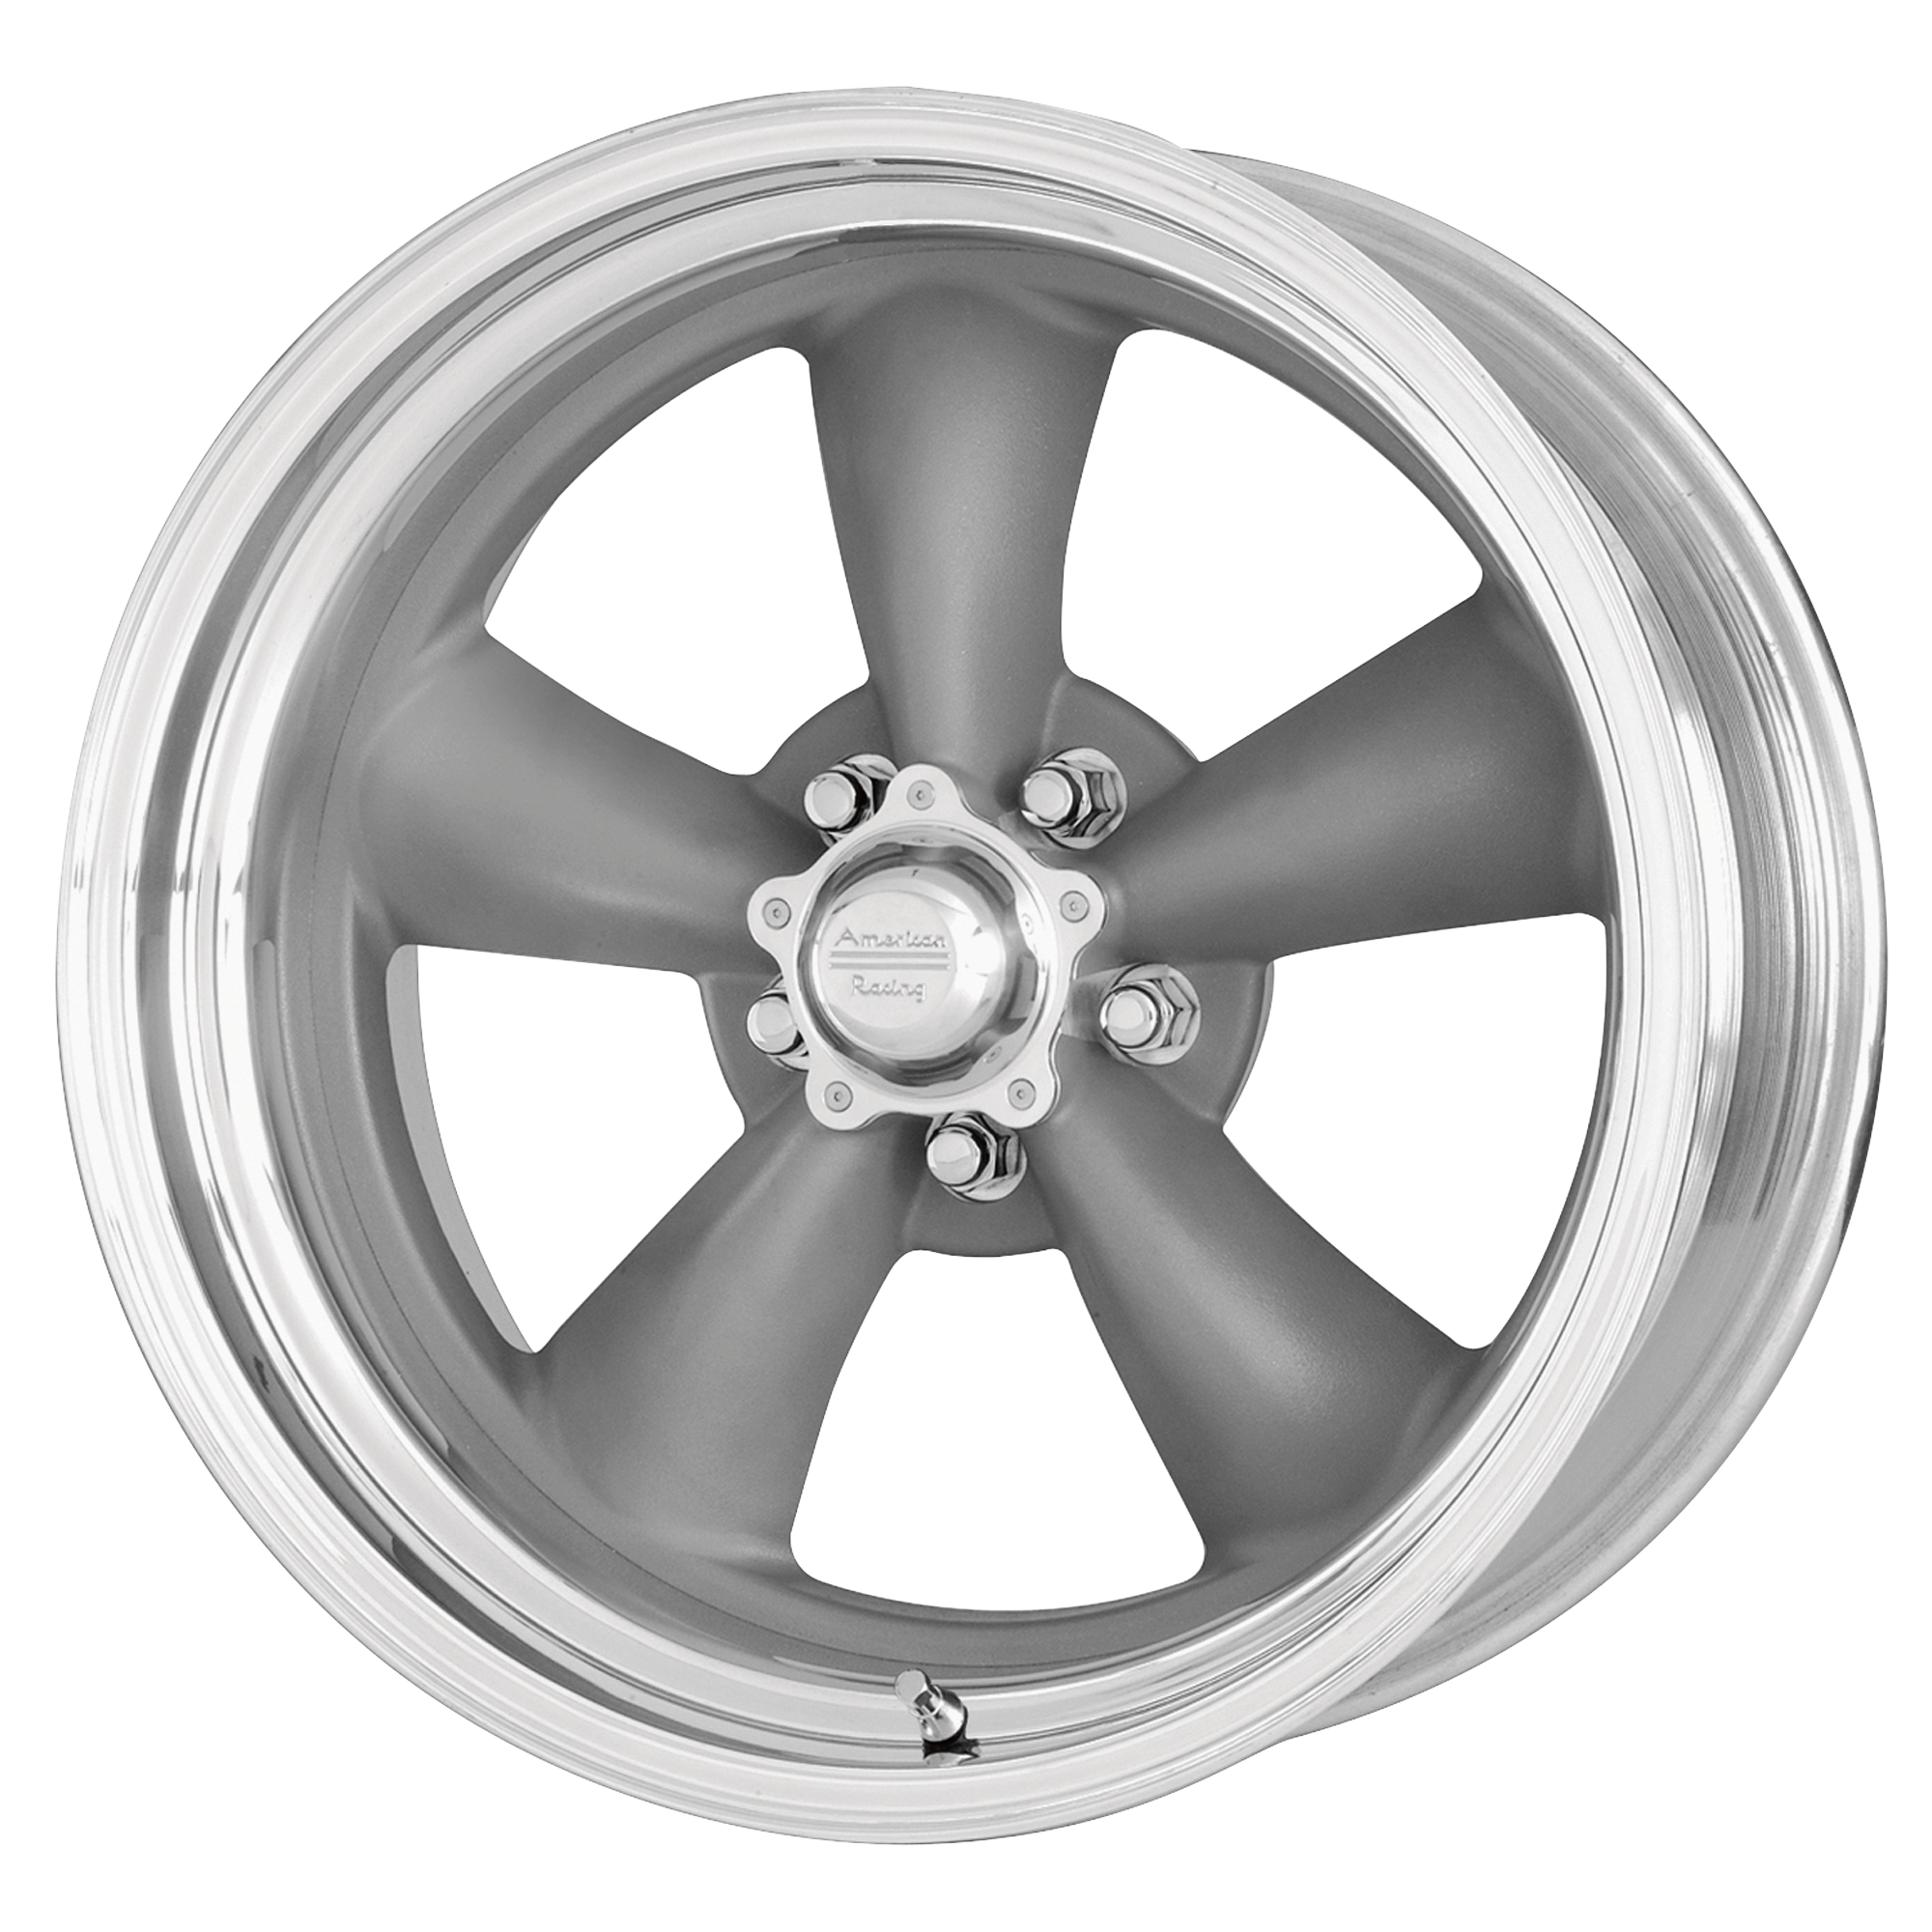 CLASSIC TORQ THRUST II ONE PIECE 20x10 5x127.00 MAG GRAY W/ MACHINED LIP (6 mm) - Tires and Engine Performance